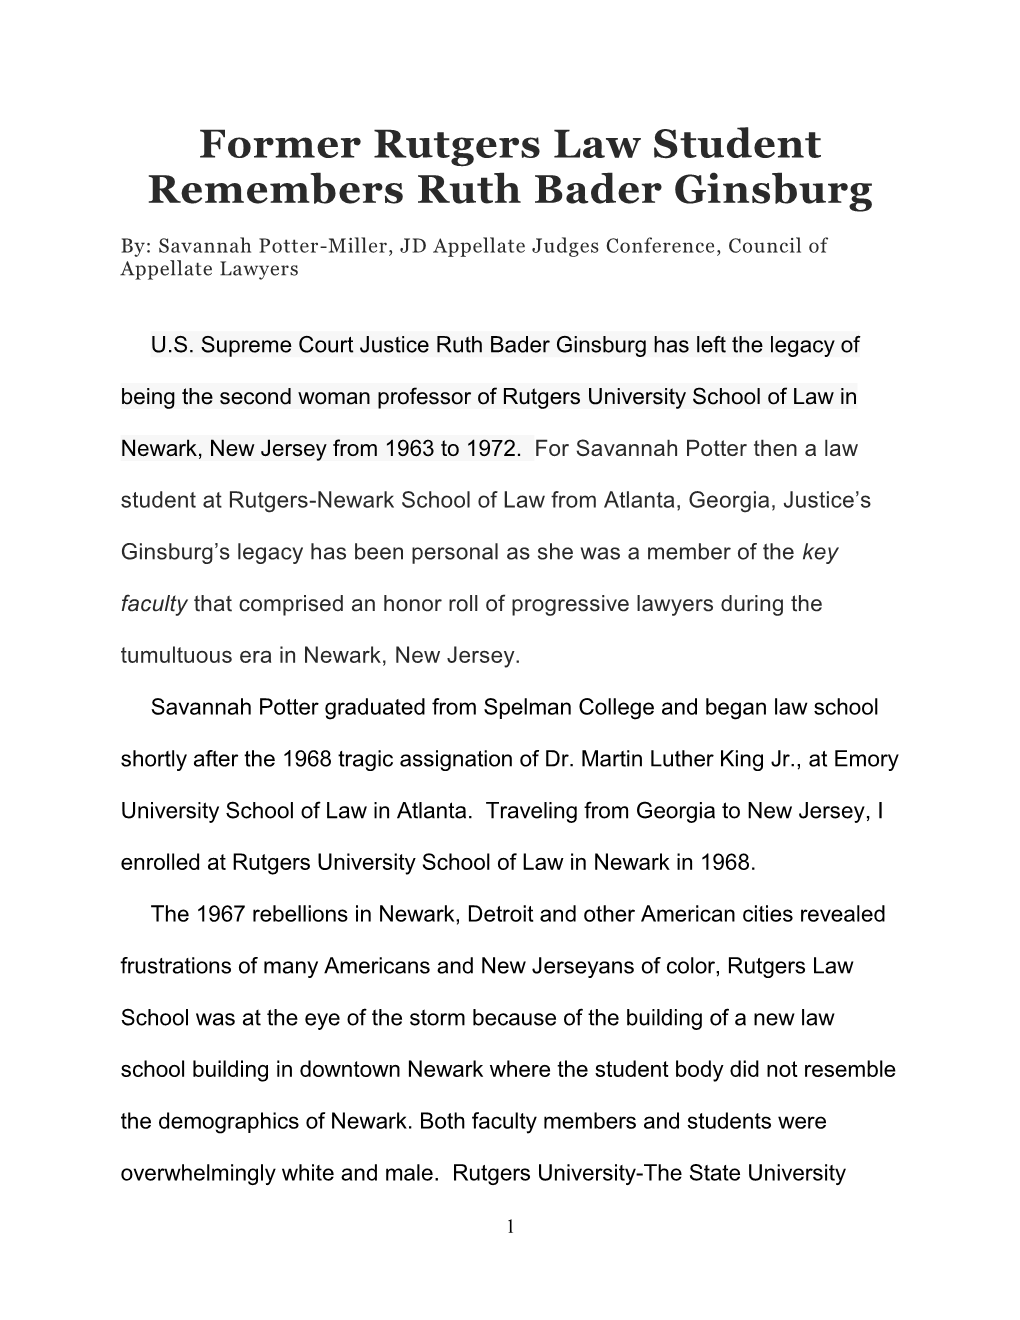 Former Rutgers Law Student Remembers Ruth Bader Ginsburg